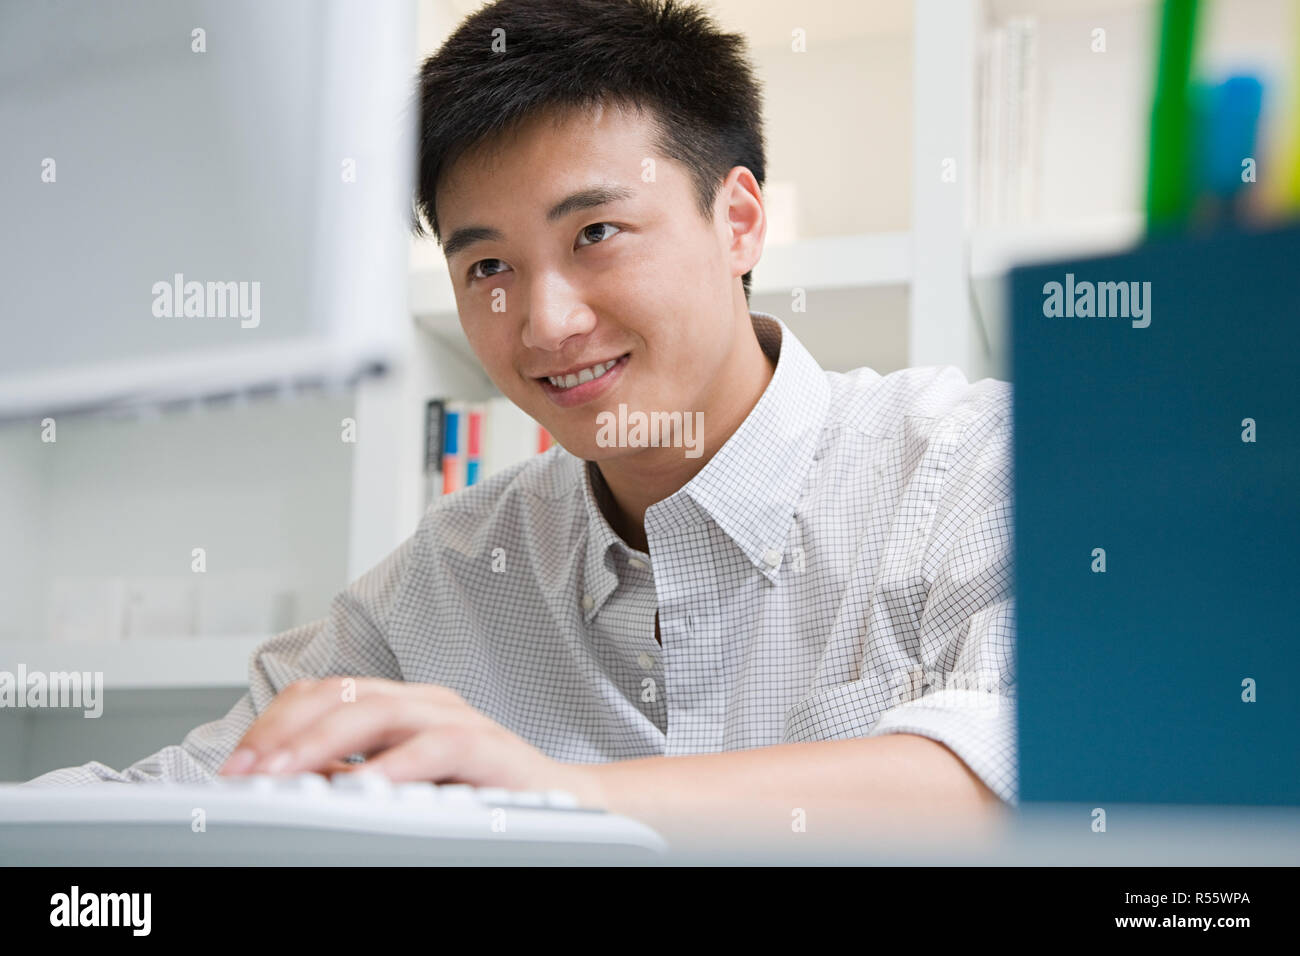 Male office worker Stock Photo